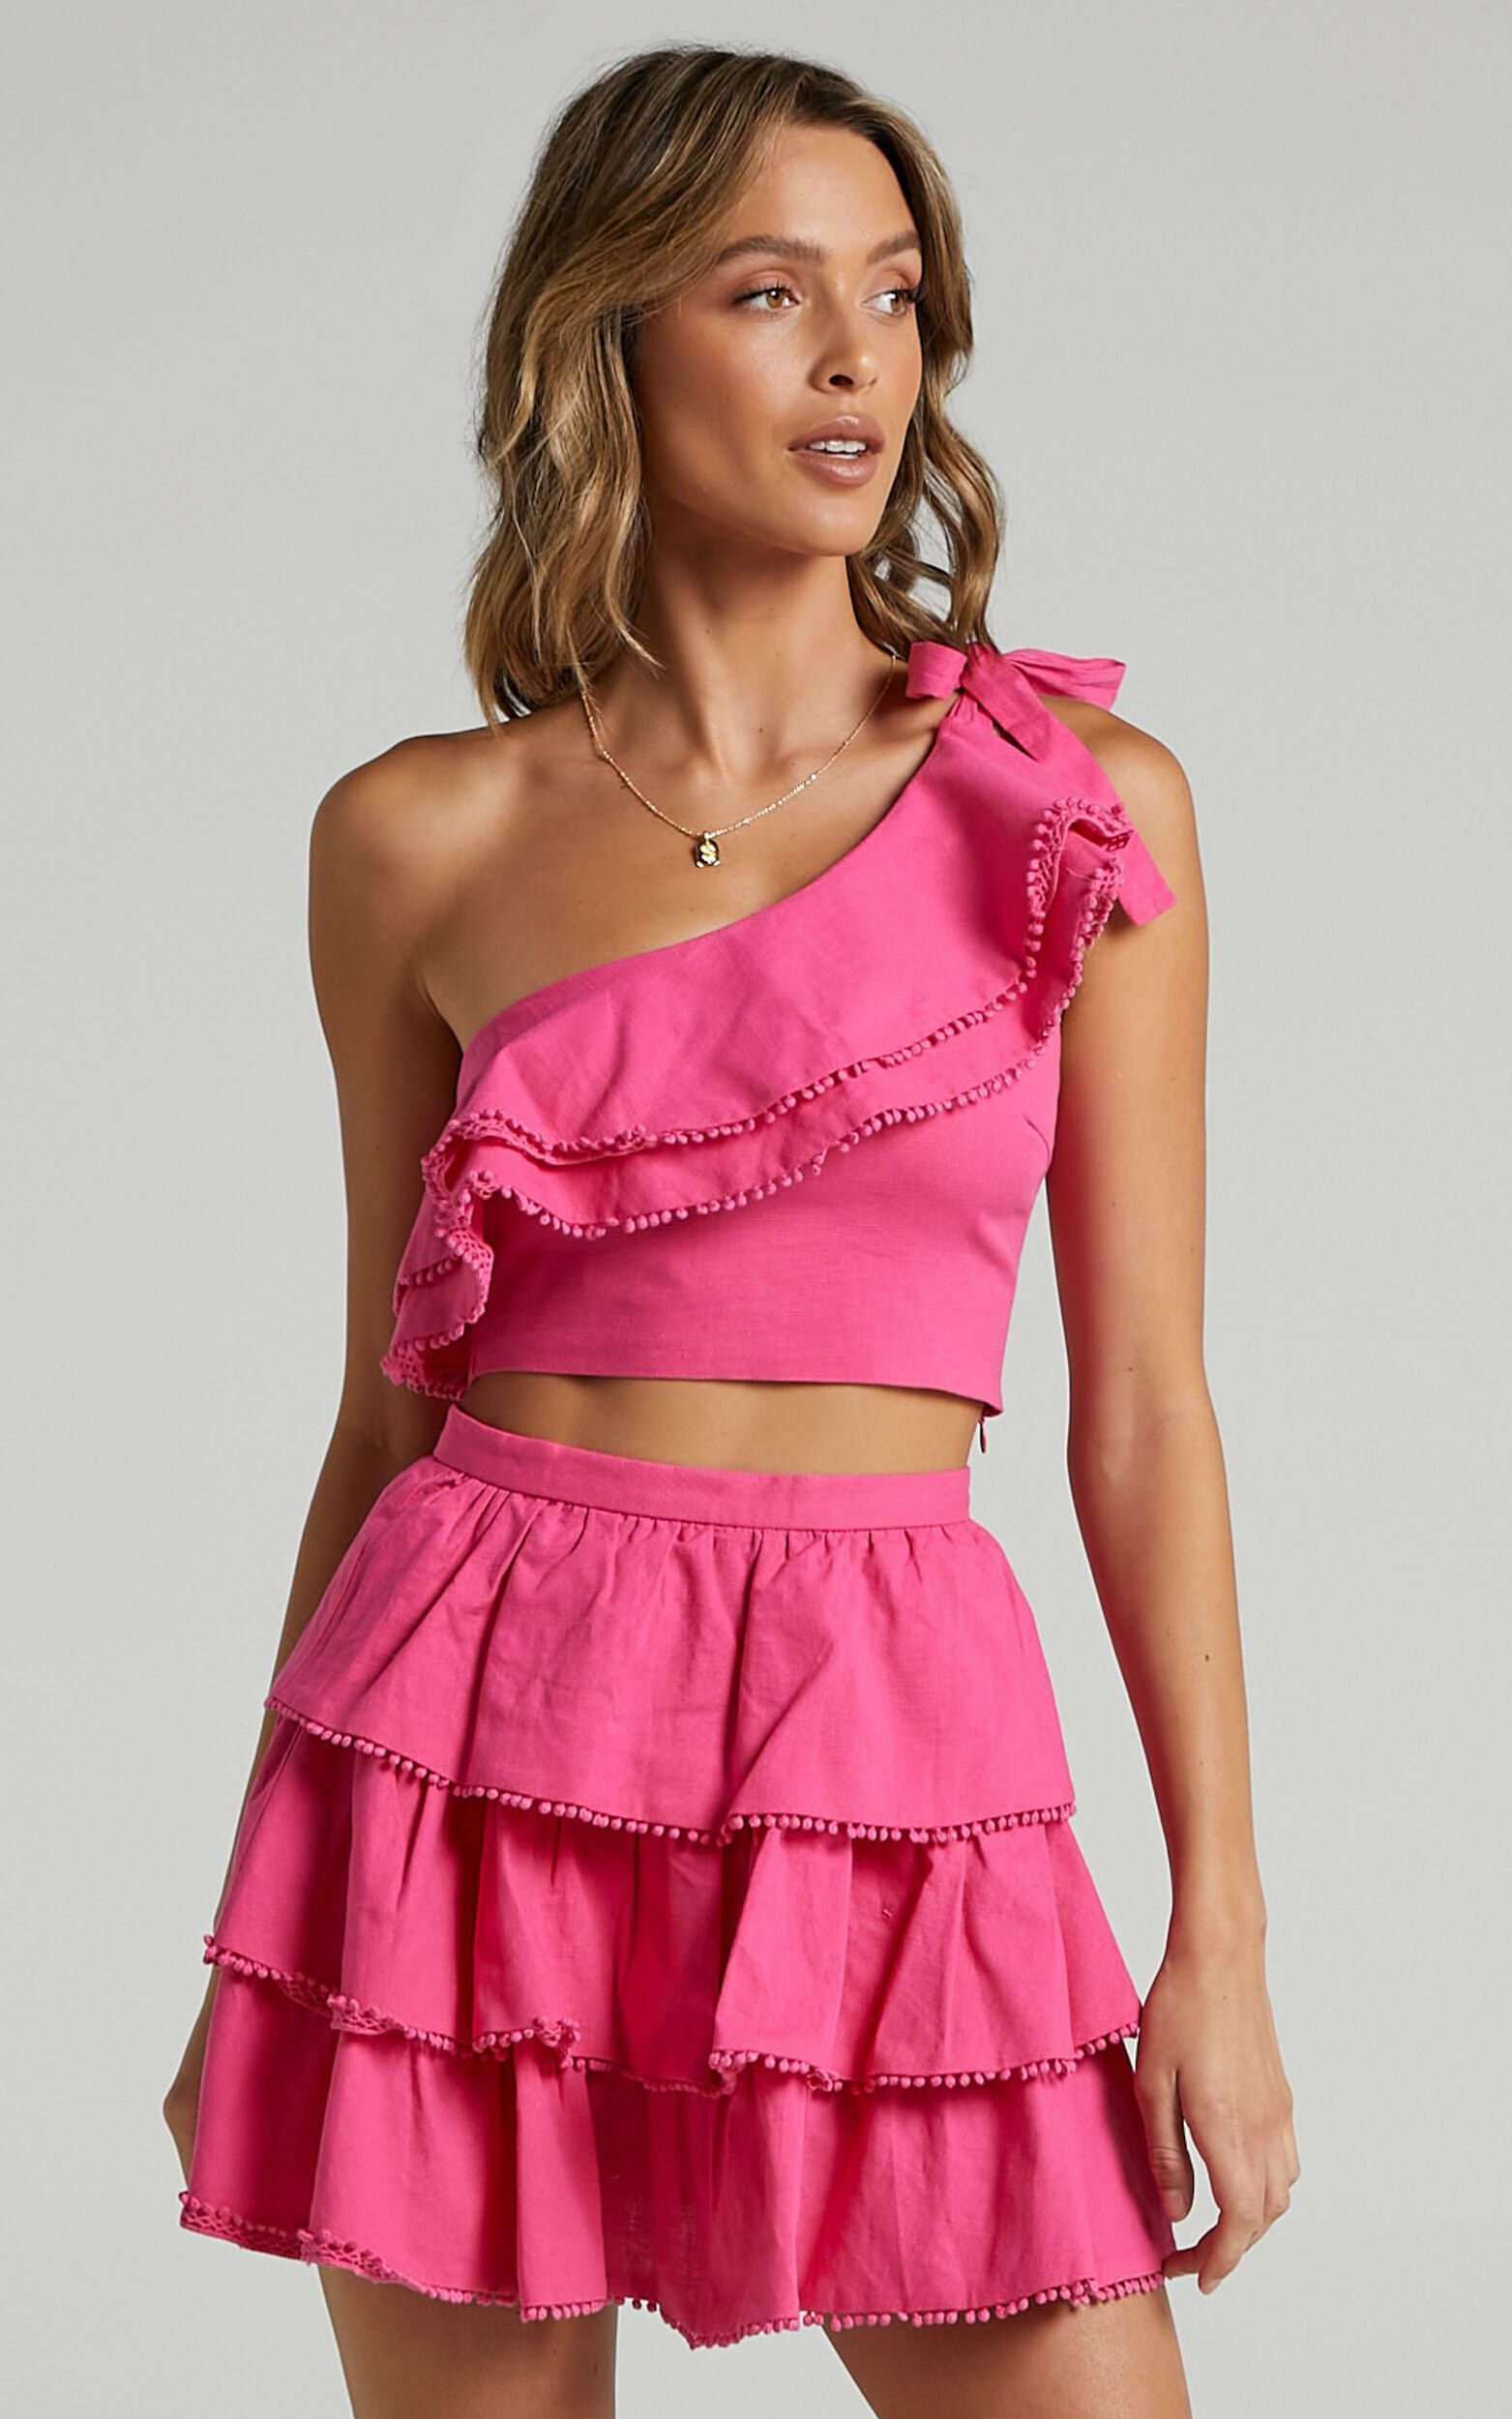 Rooftop Spritz Two Piece Mini Skirt Set in Hot Pink | Showpo USA